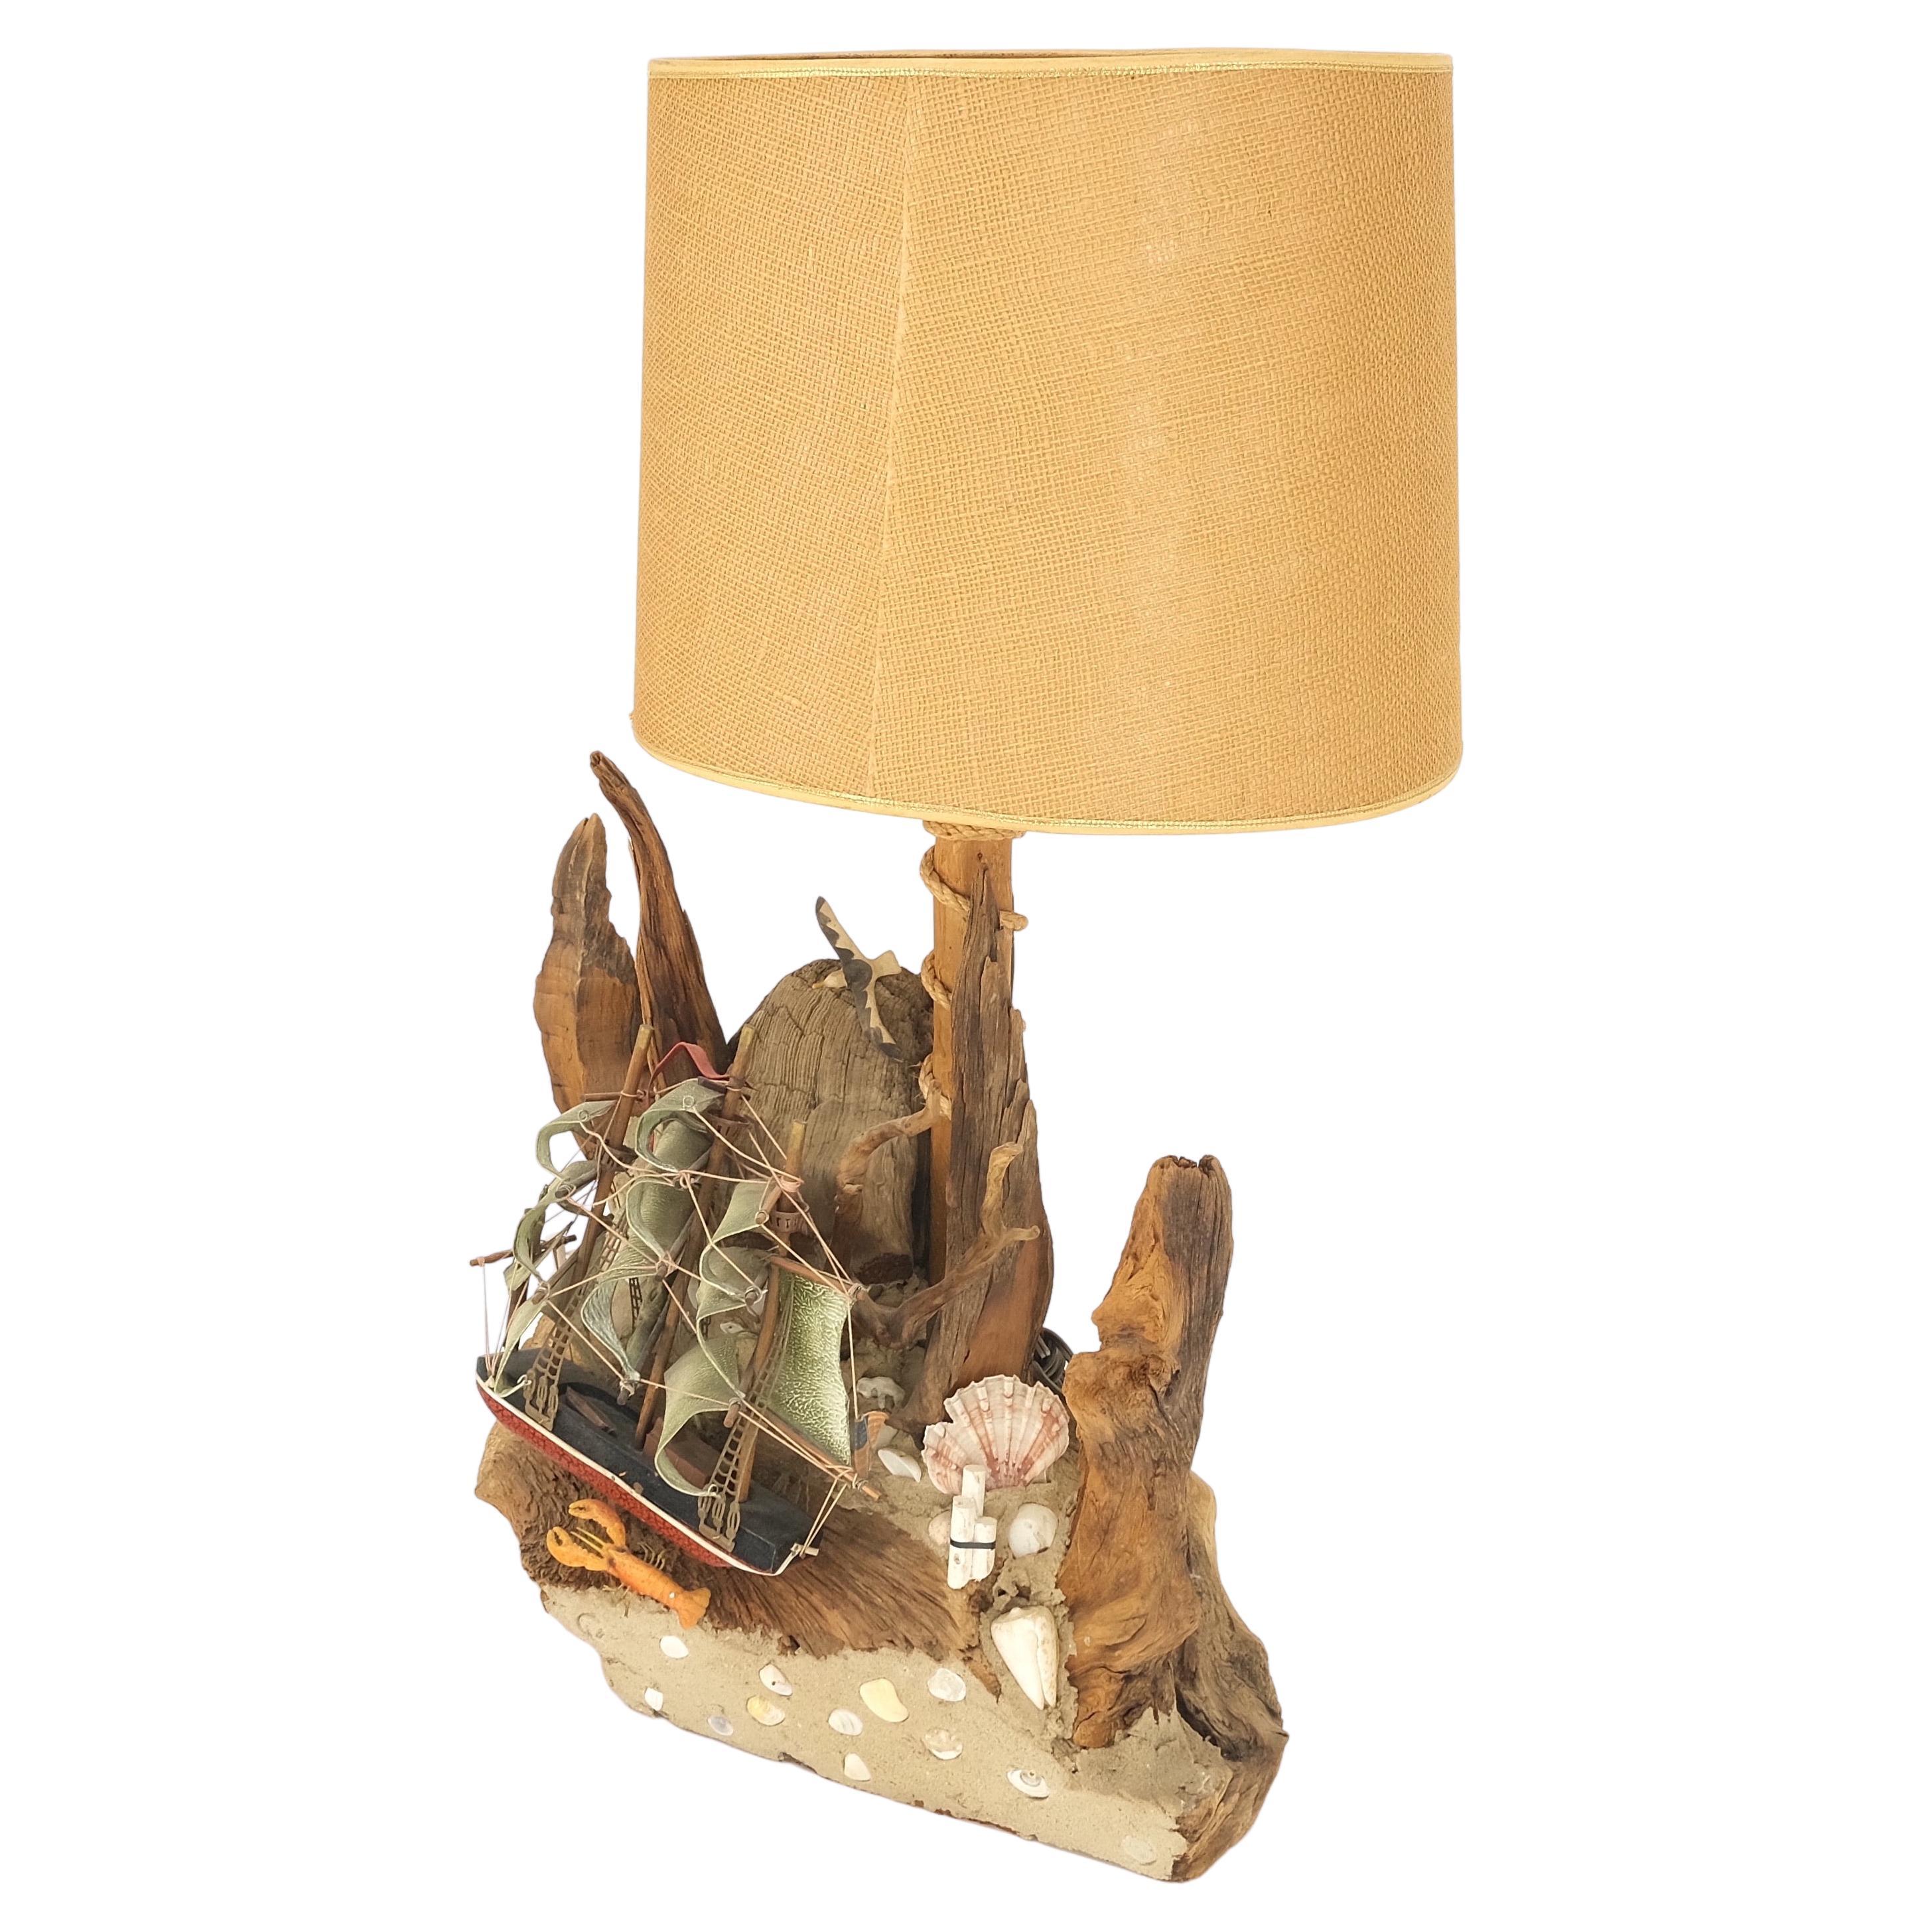 Sea Naval Shells Theme Decorated Driftwood Base Table Lamp Mid-Century Modern